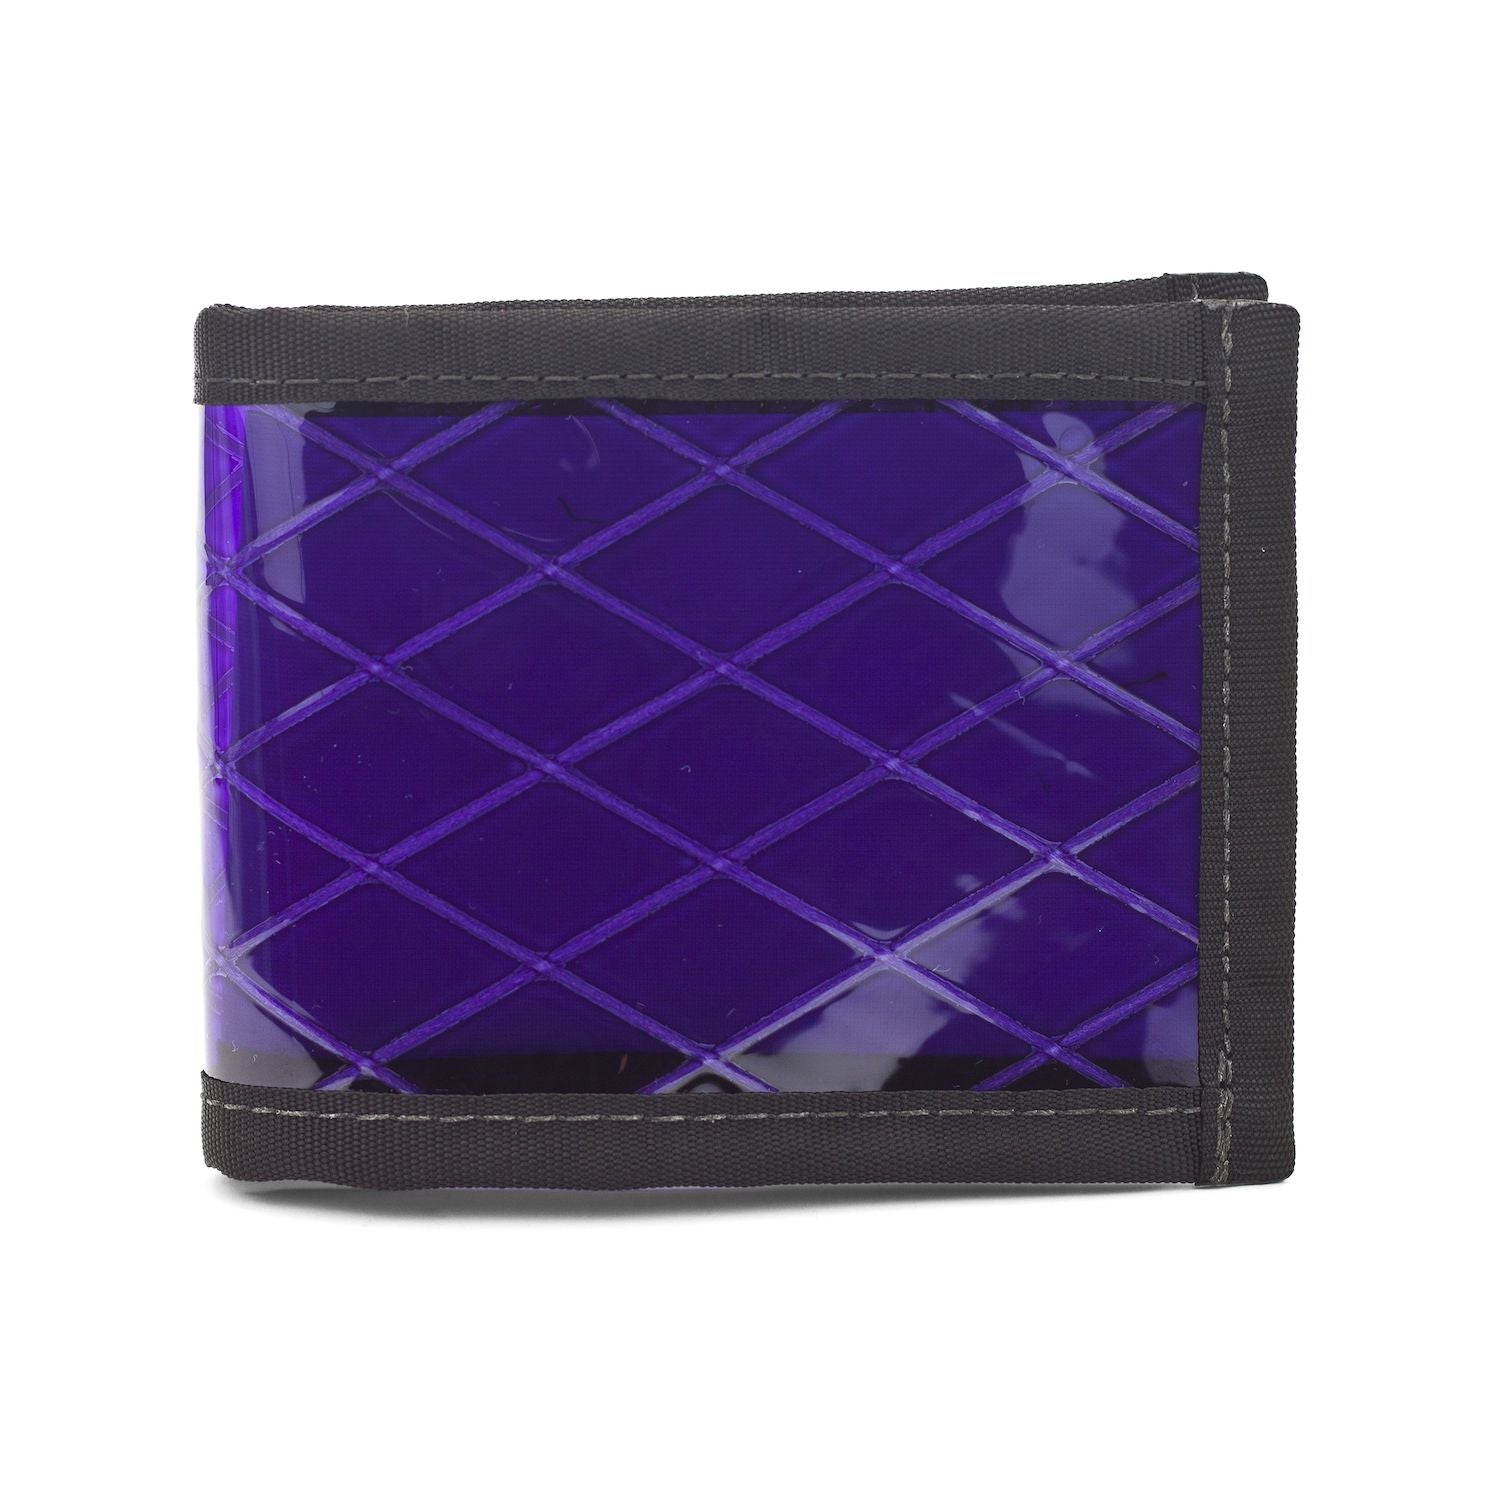 Flowfold Recycled Sailcloth Vanguard Bifold Wallet Made in USA, Maine by Flowfold Purple Sailcloth